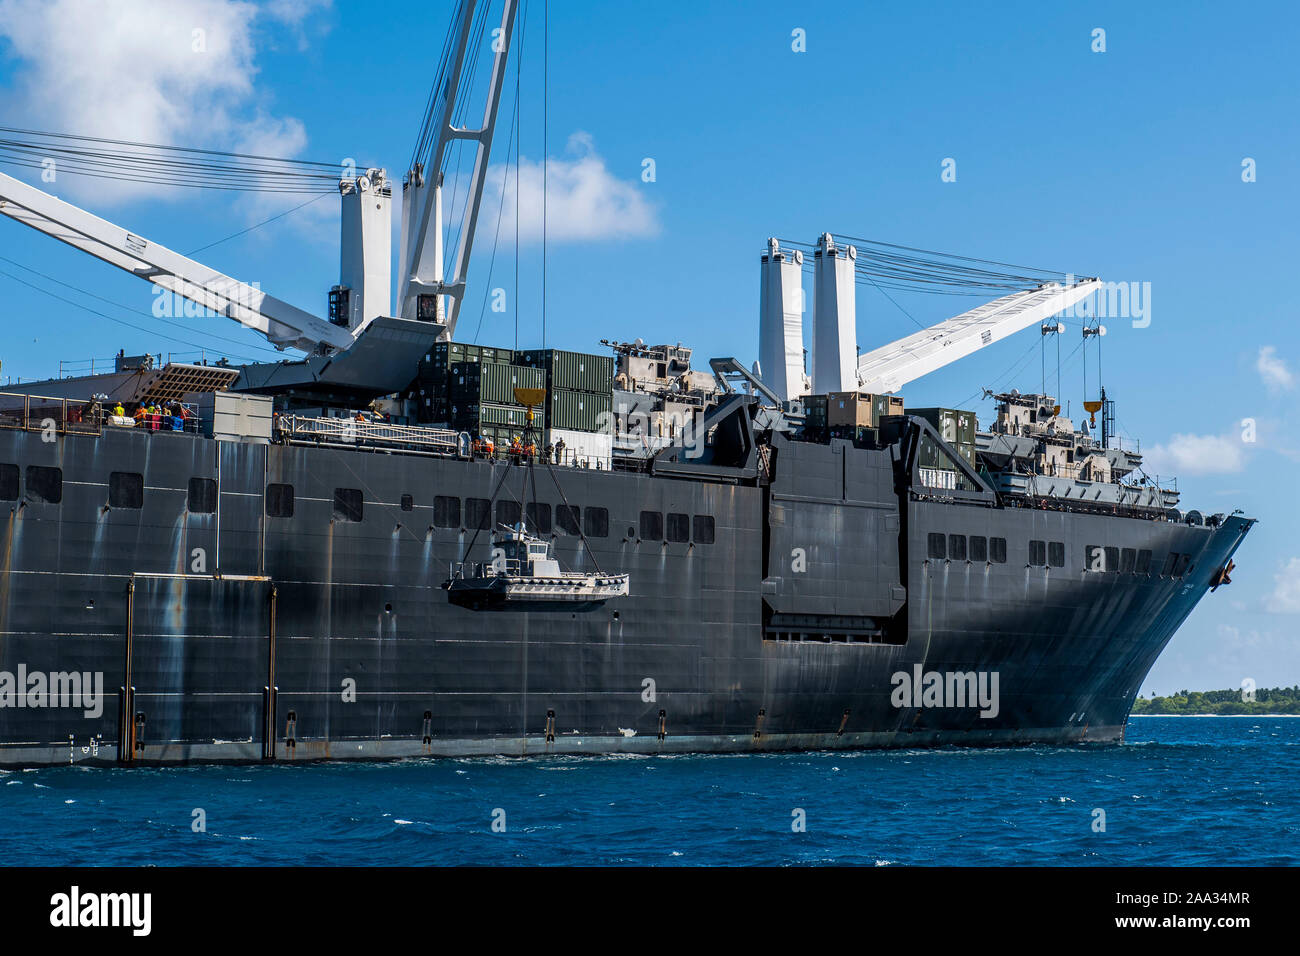 191111-N-CO914-1071  DIEGO GARCIA, British Indian Ocean Territory (November 11, 2019) Sailors lower a maritime prepositioning force utility boat from Military Sealift Command Bob Hope-class roll-on roll-off vehicle cargo ship USNS Seay (T-AKR 302) using a crane during an Improved Navy Lighterage System (INLS) training mission. Navy Cargo Handling Battalion (NCHB) 1, NCHB 8, NCHB 11, NCHB 13, Assault Craft Unit (ACU) 1 and Amphibious Construction Battalion (ACB) 1 are participating in the INLS training mission under the direction of Commander, Task Force (CTF) 75 in preparation for upcoming joi Stock Photo